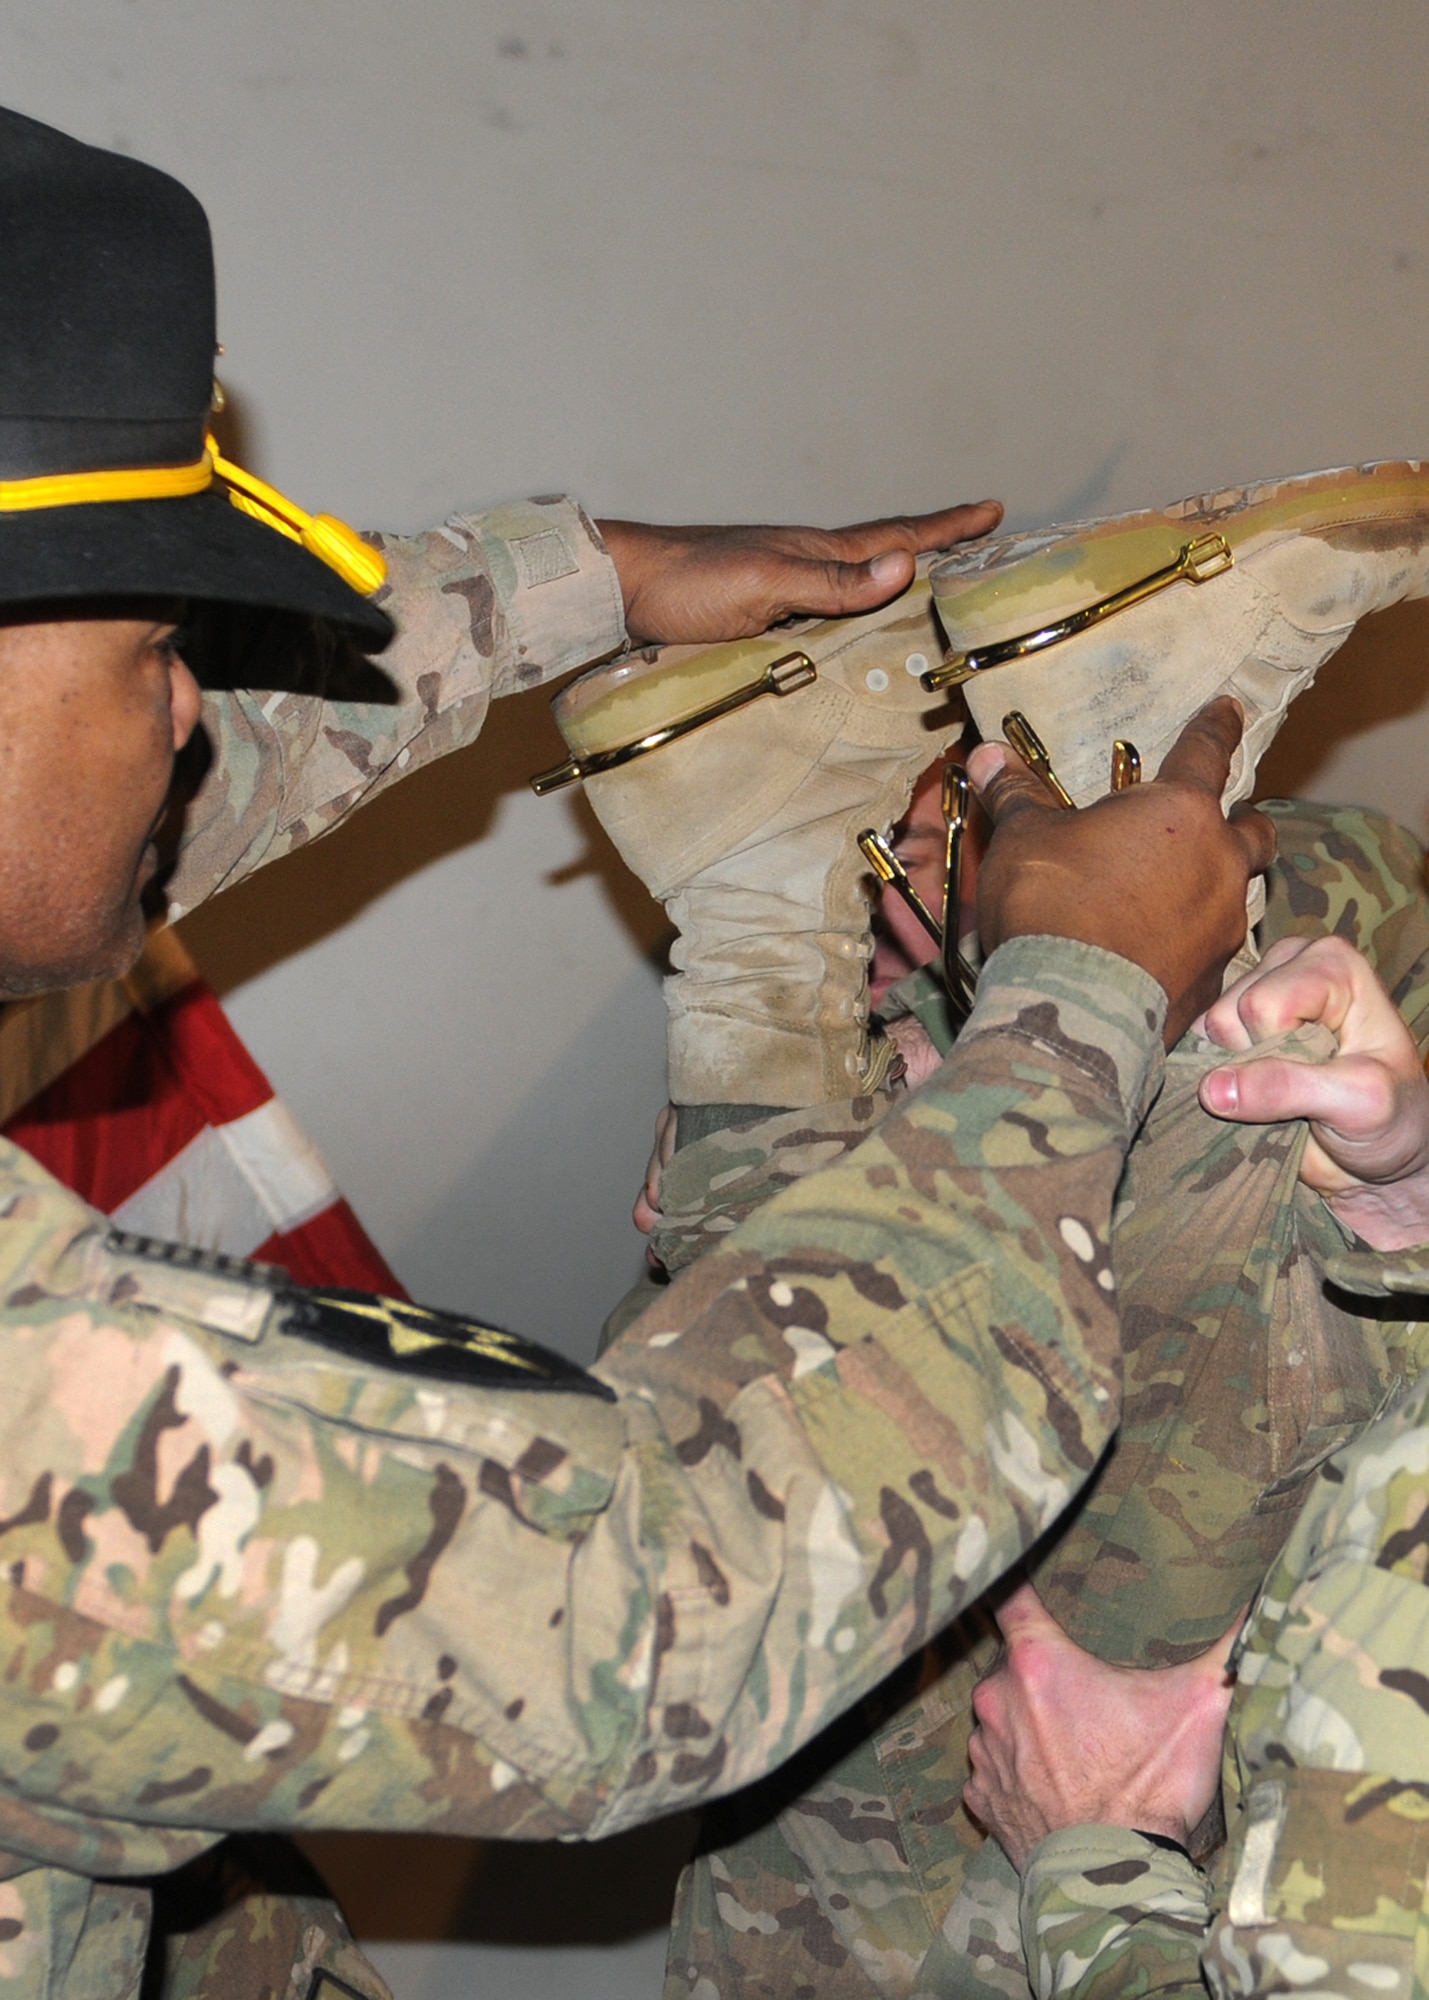 Golden spurs are applied to the boots of competitors who complete the challenges at the Spur Ride at Bagram Airfield, Afghanistan, Feb. 21, 2012.  The Spur Ride is a series of mental and physical tests that evaluated leadership, technical and tactical proficiency, and the ability to operate as part of a team under high levels of stress and fatigue, under both day and night conditions.  Spur Holders are then inducted into the Order of the Spur.  (U.S. Army photo/Sgt. Andrea Merritt)